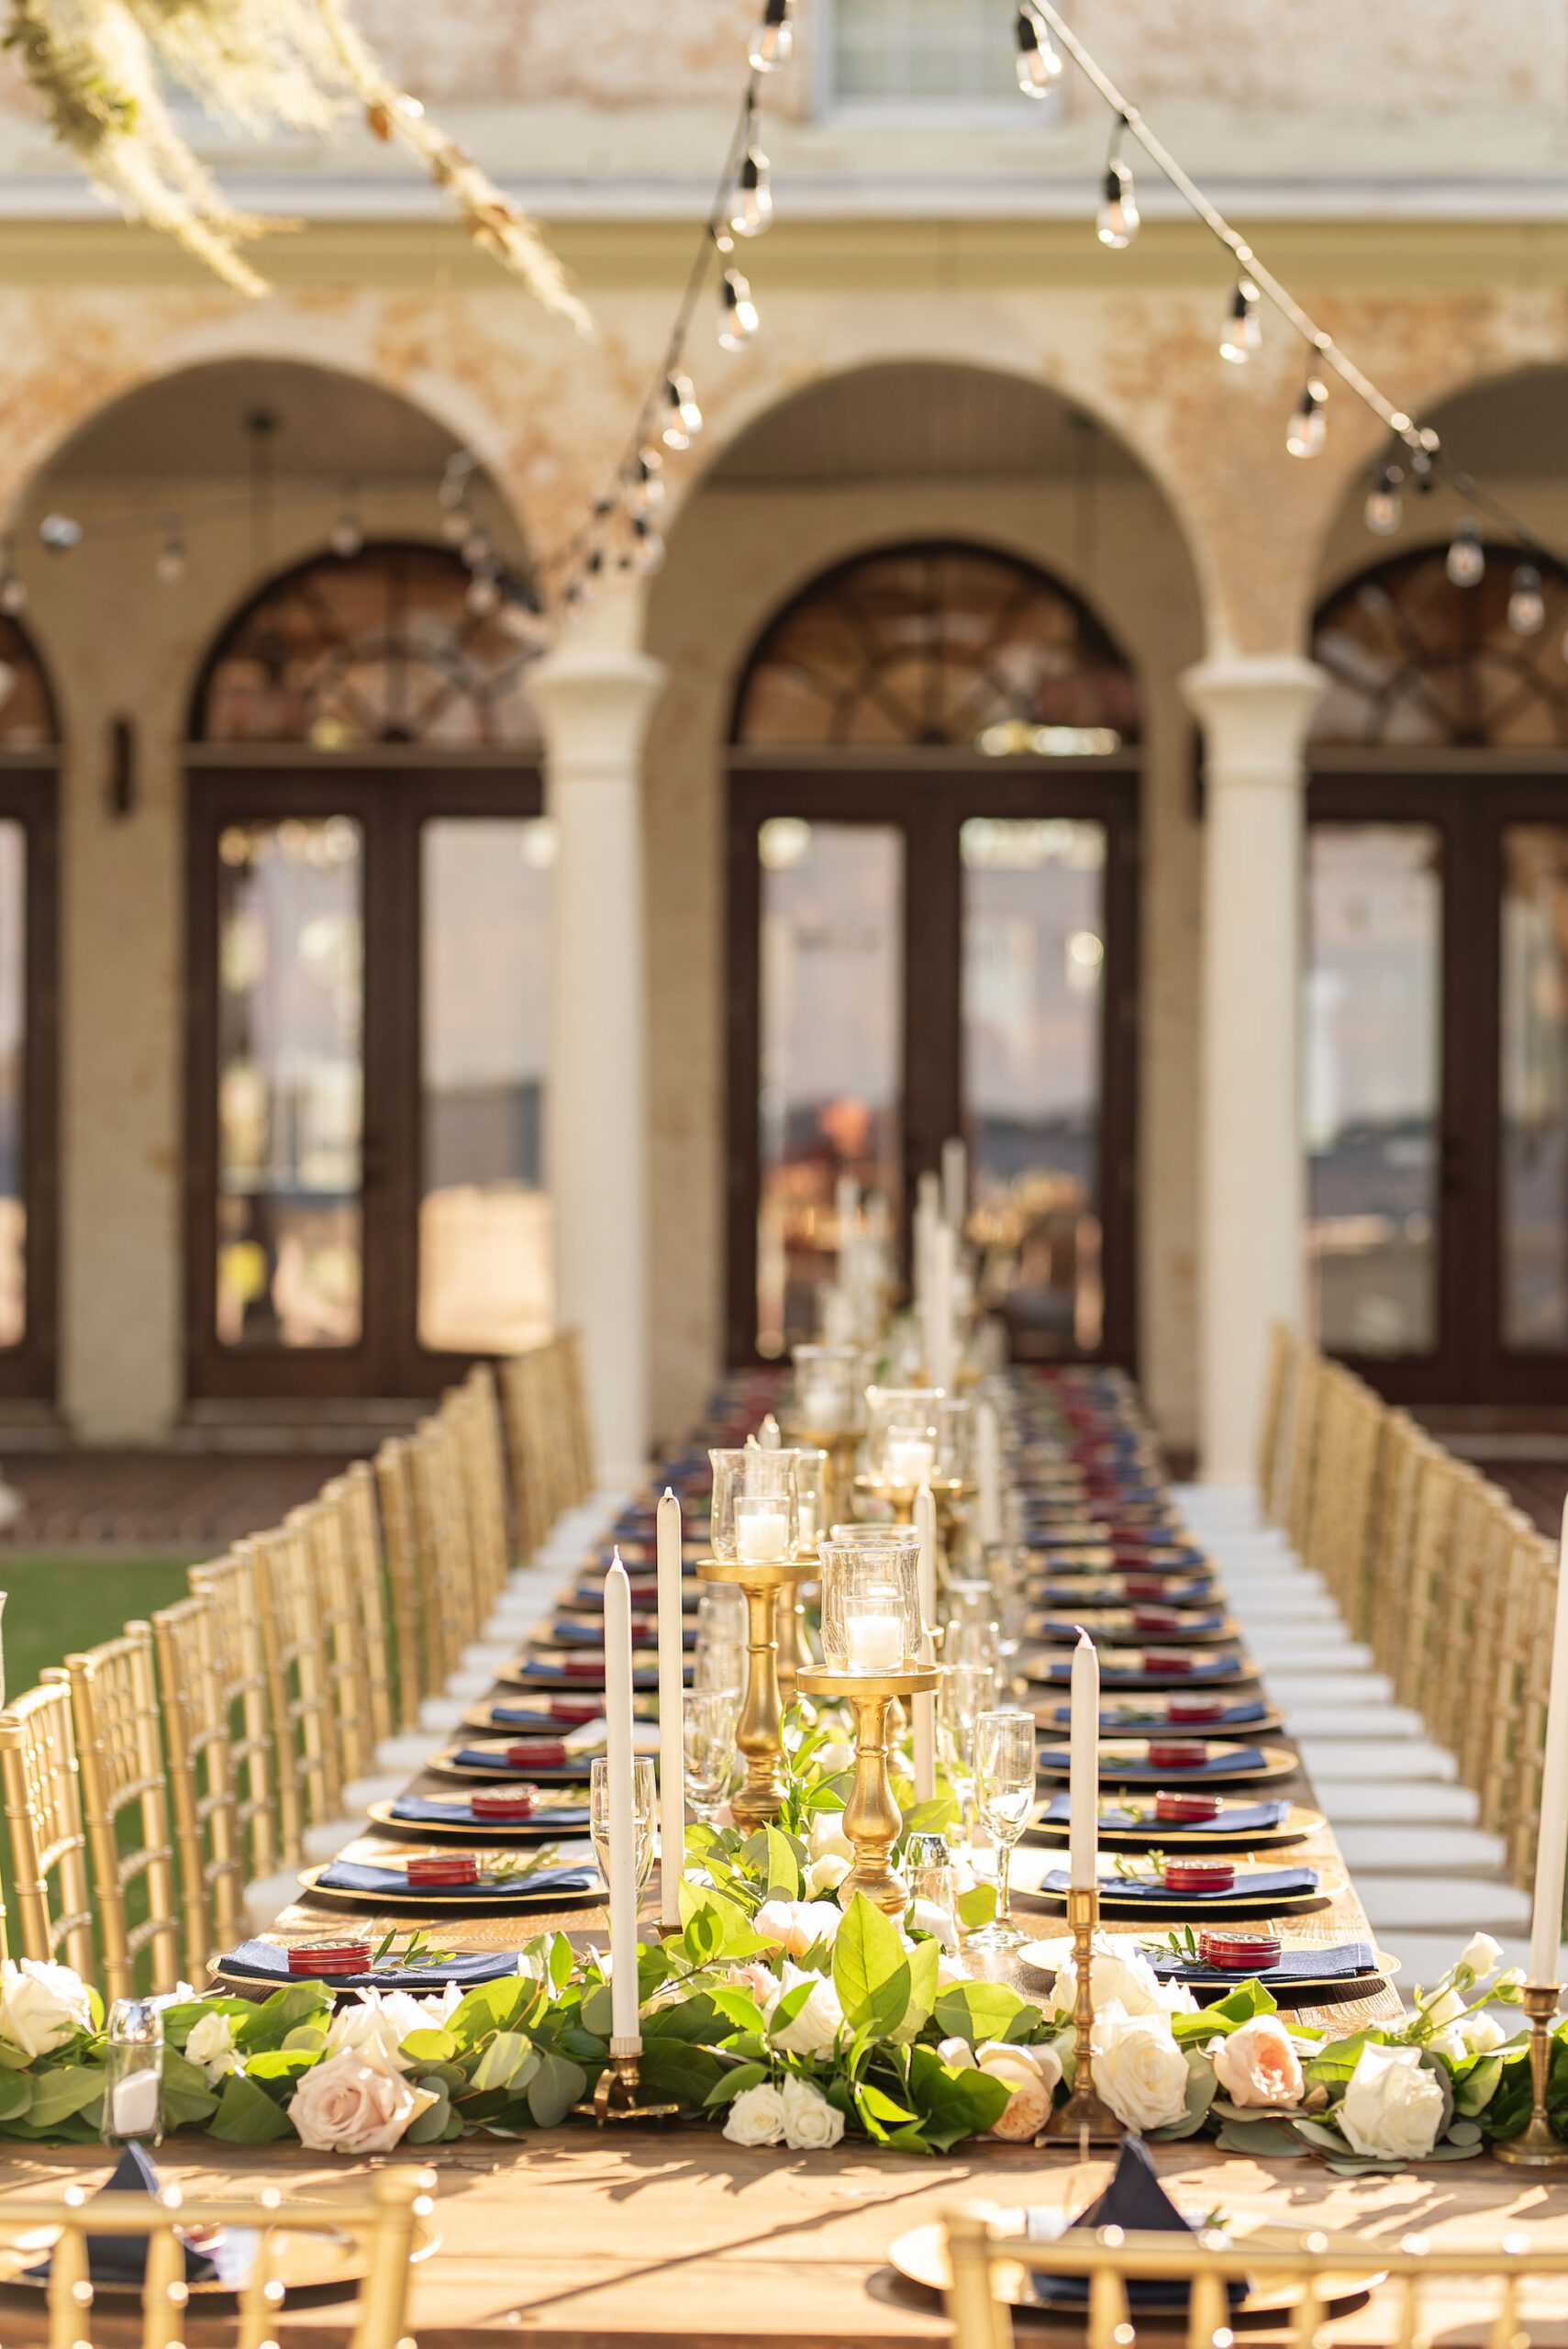 Italian Inspired Tuscan Wedding Reception Decor | Long Feasting Table with Gold Chiavari Chairs | Taper Candle, Votive Candle Centerpiece Inspiration